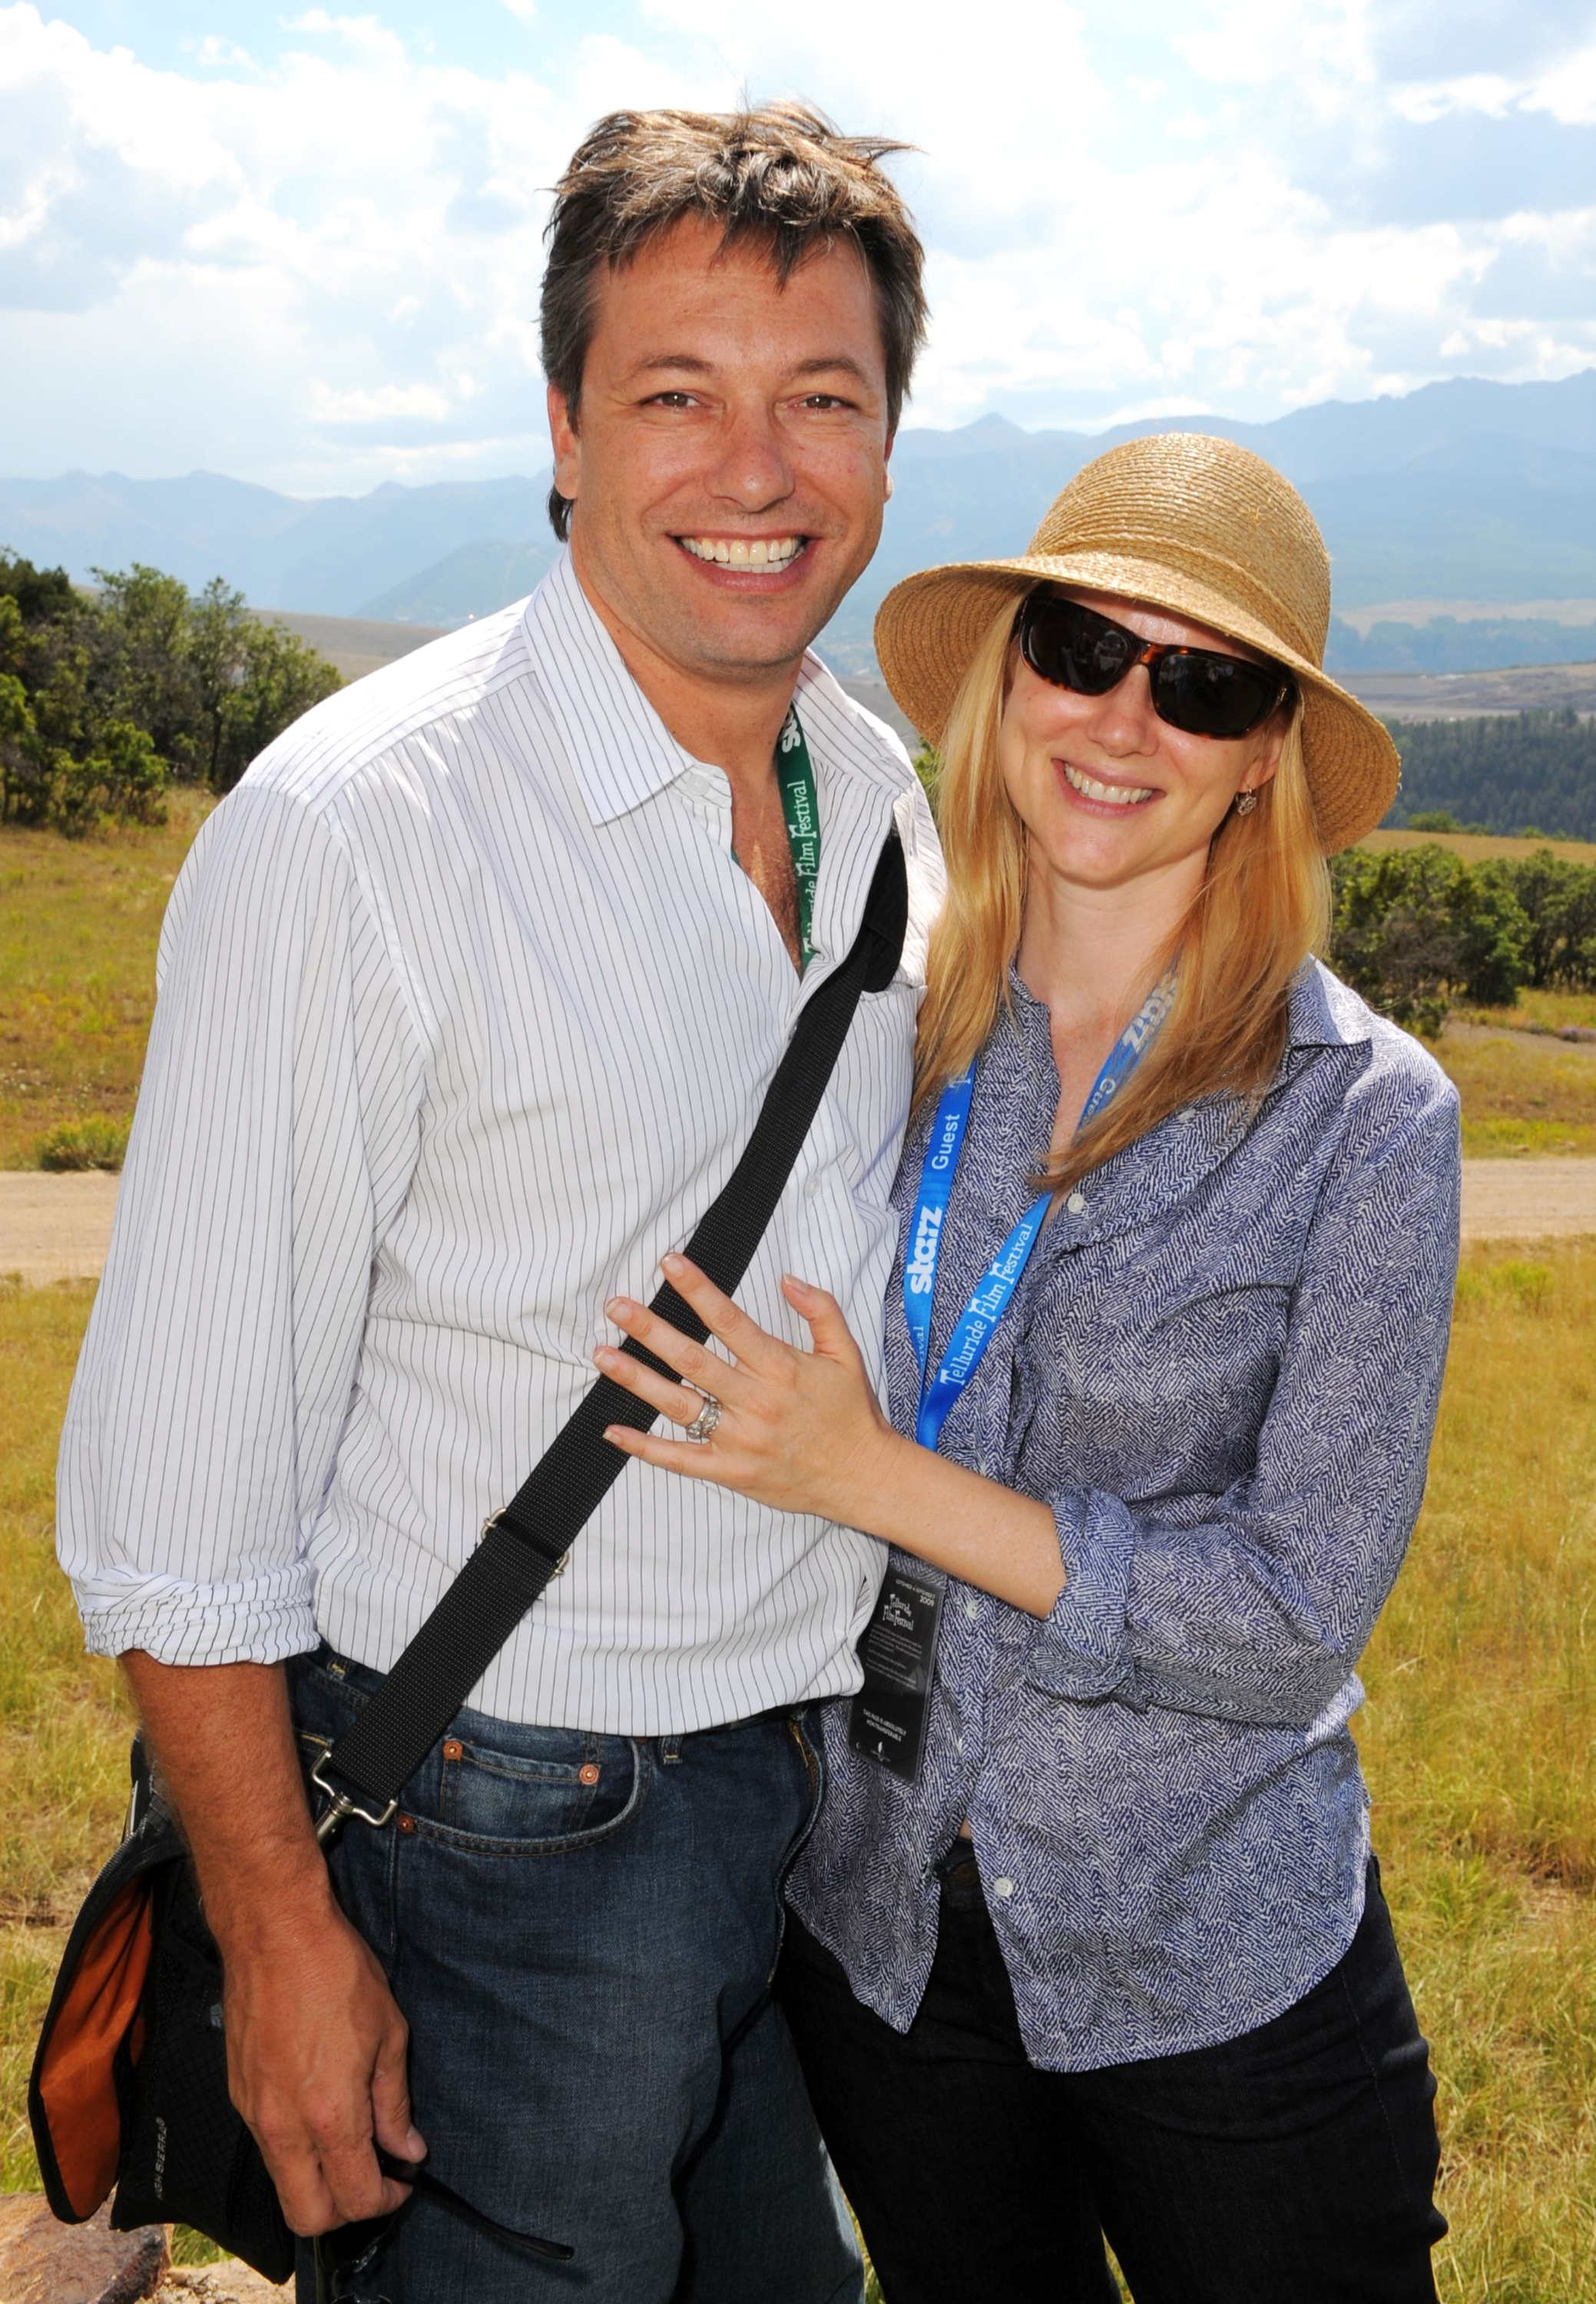 Laura Linney and Marc Schauer during the 36th Telluride Film Festival held at the Opera House on September 4, 2009, in Telluride, Colorado. | Source: Getty Images.